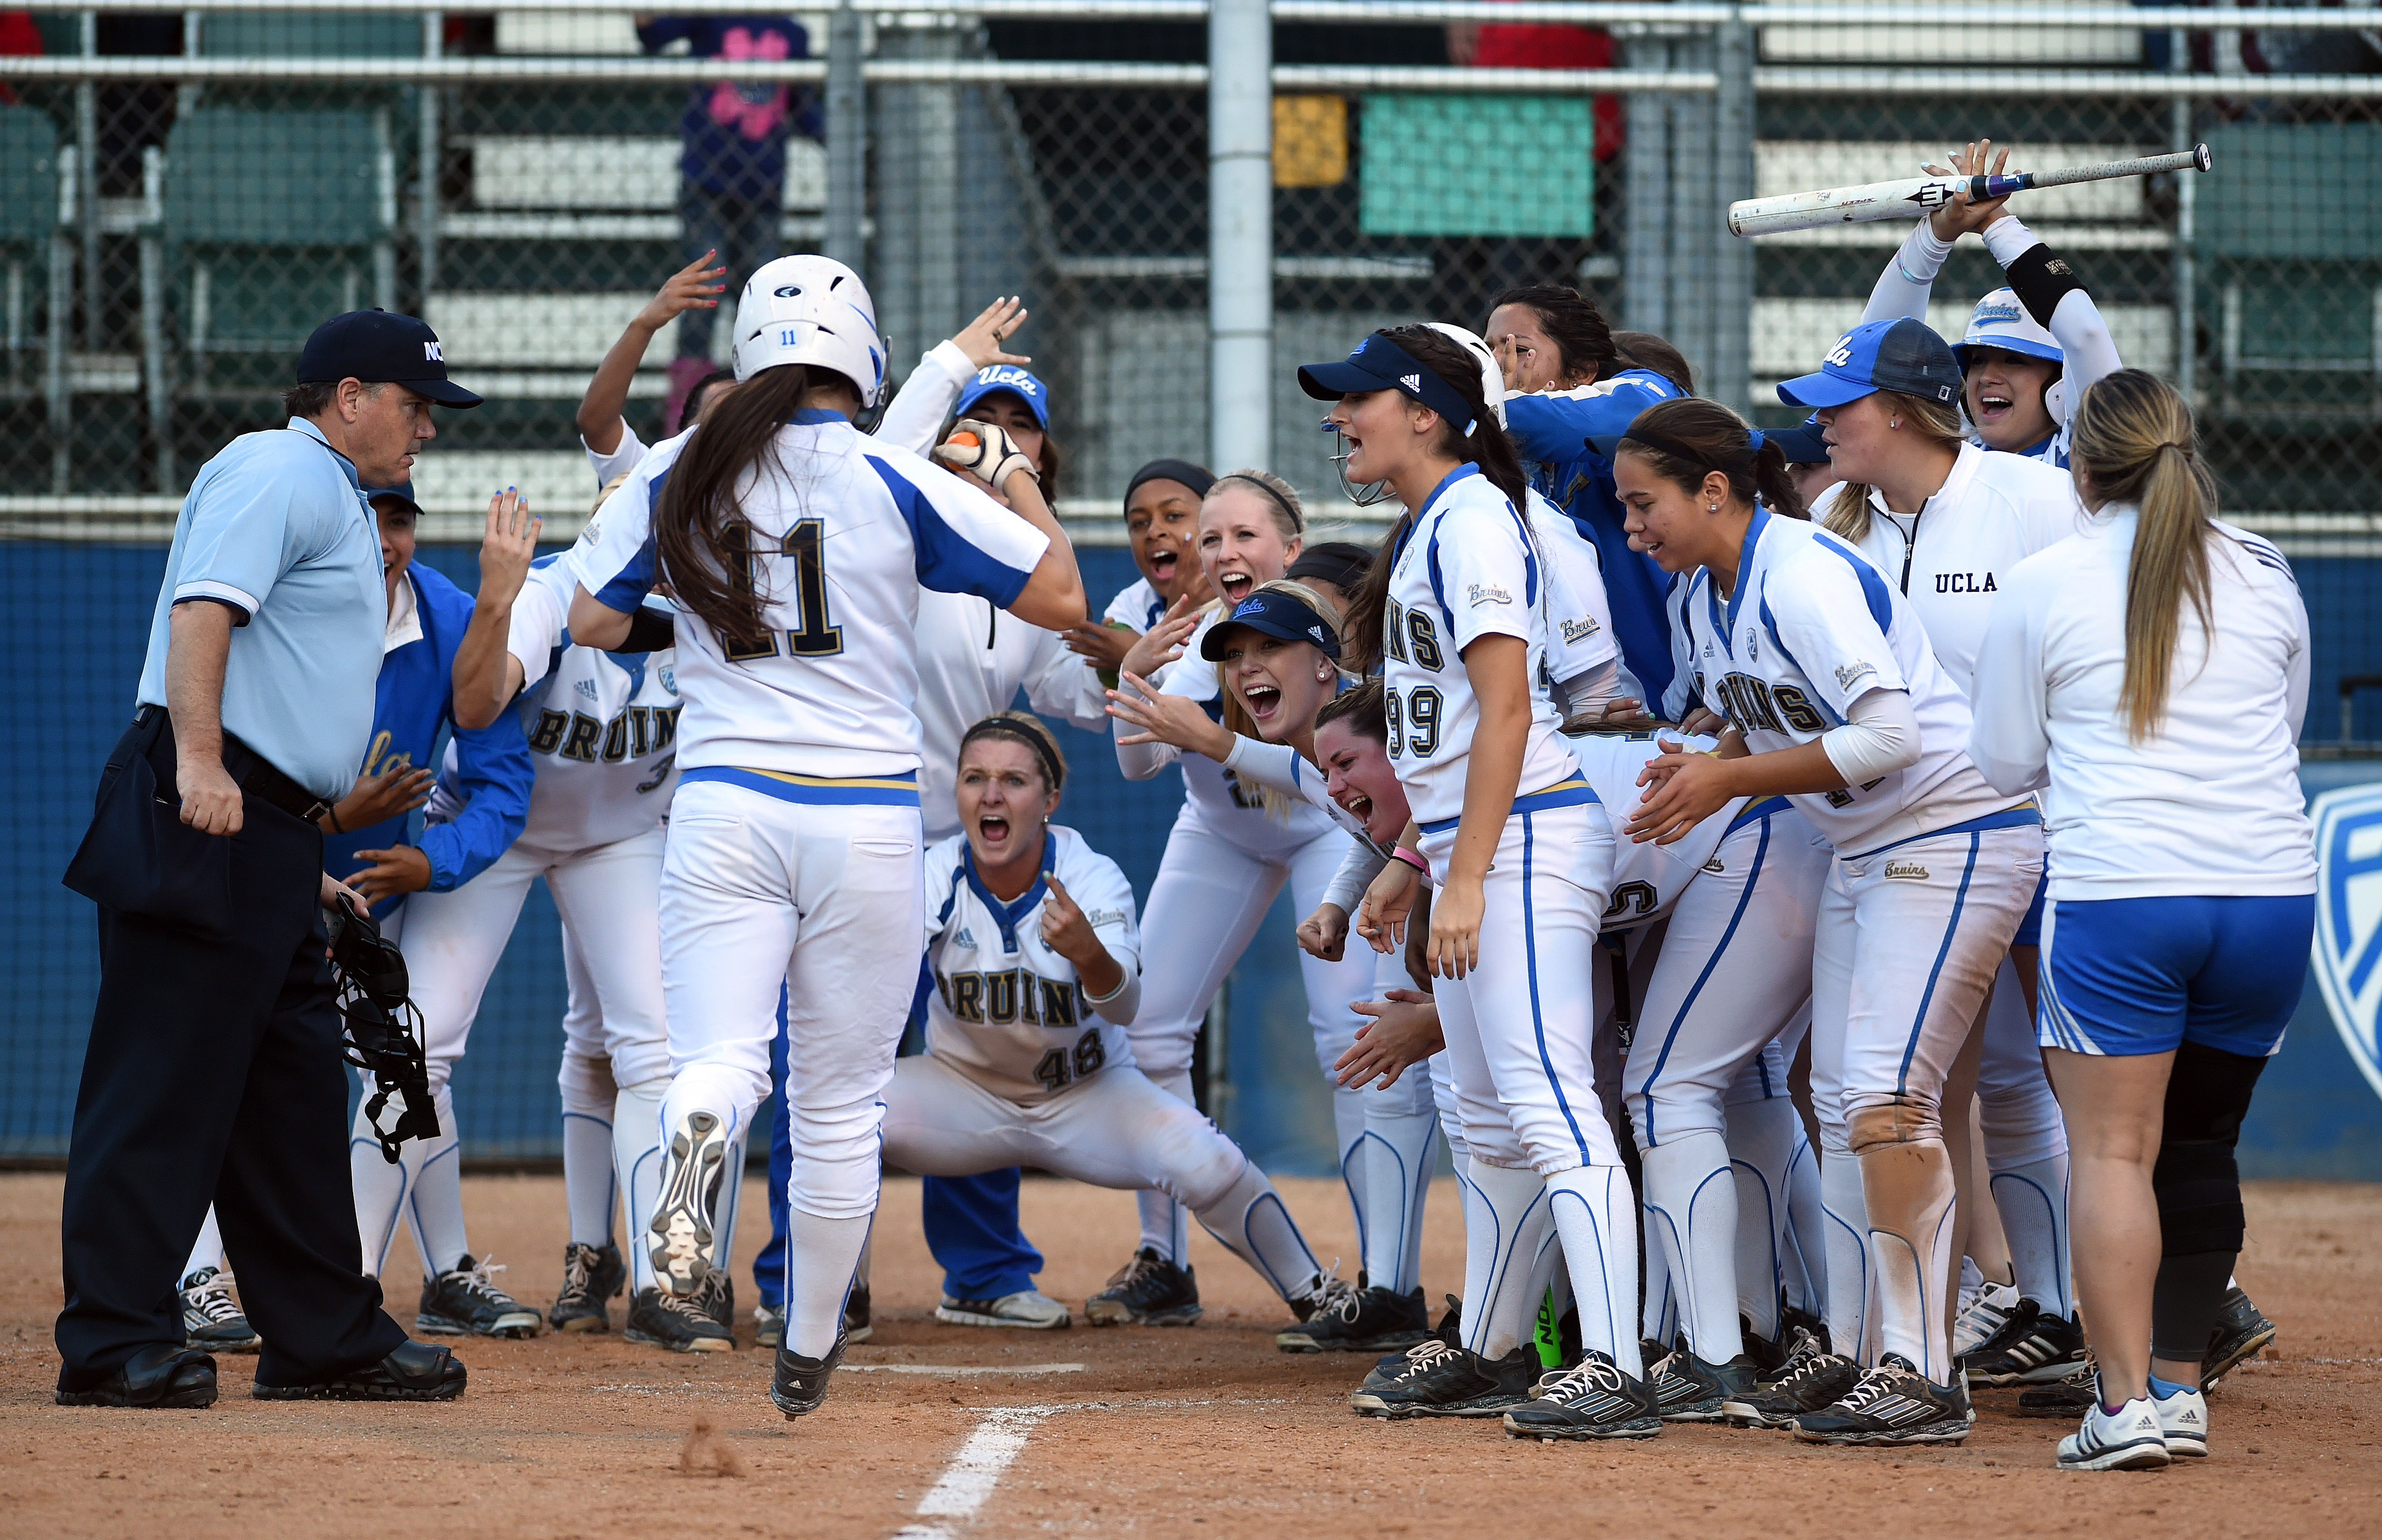 UCLA catcher Stephany LaRosa heads for home plate after hitting a home run during a 9-1 win over CSUN on Friday. The Bruins hit 10 home runs as they swept through their NCAA Regional in three games at  Easton Stadium (Hans Gutknecht/Staff)